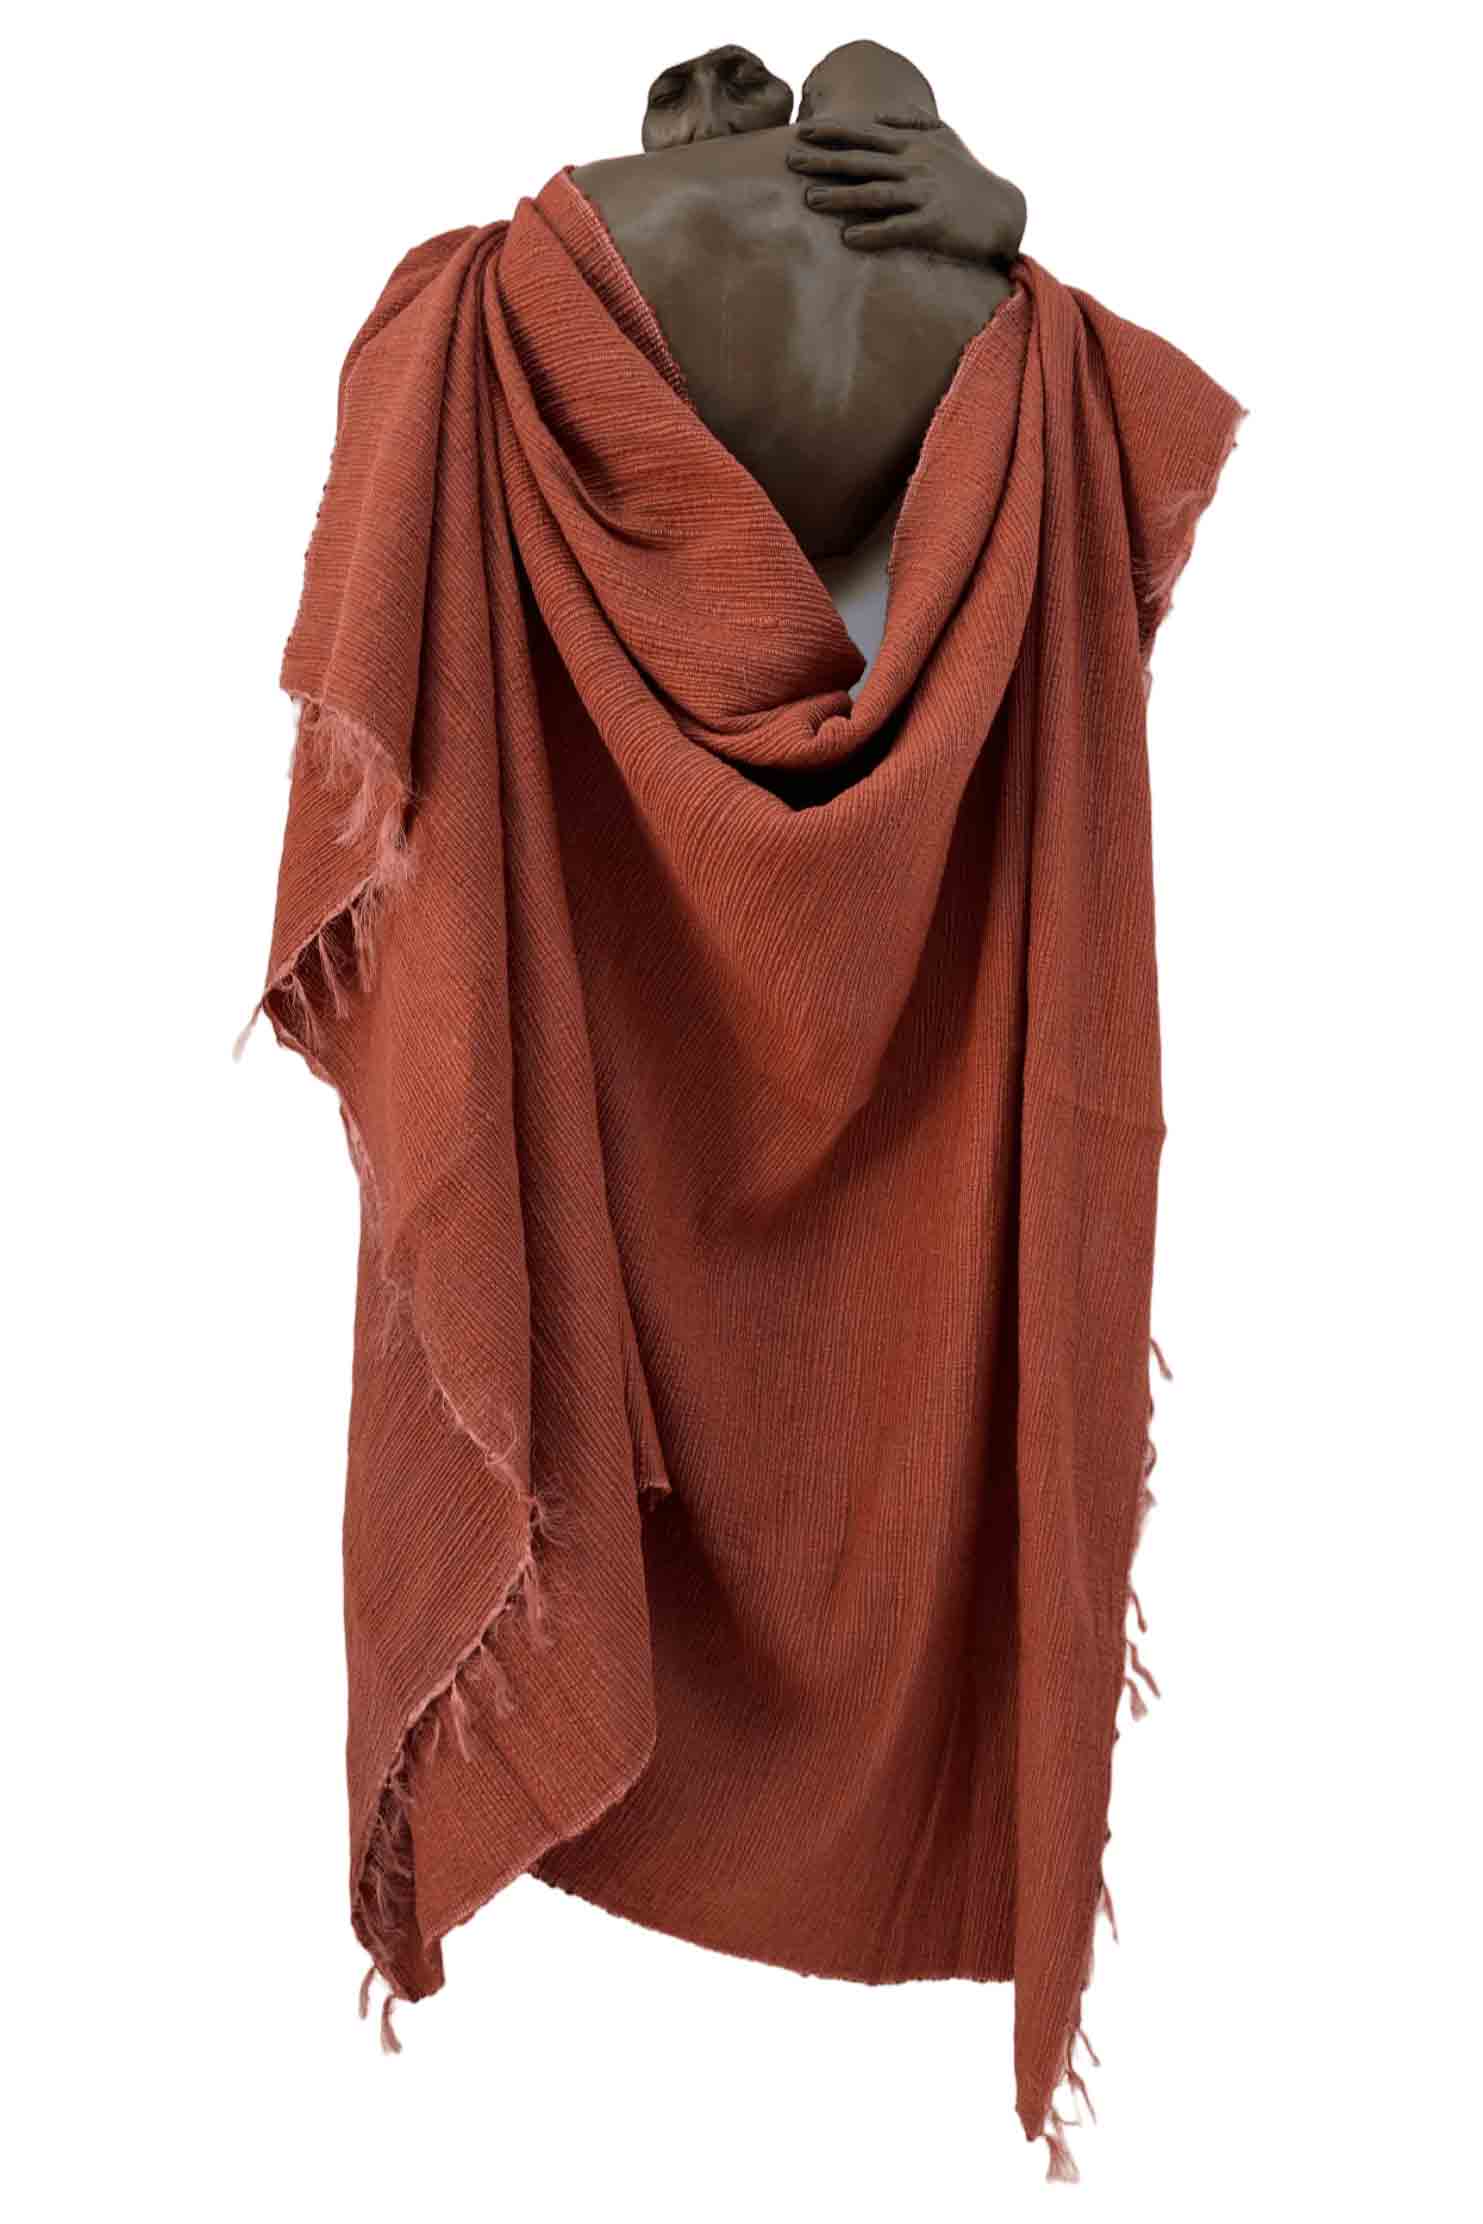 The Embrace Blanket Collection Rust